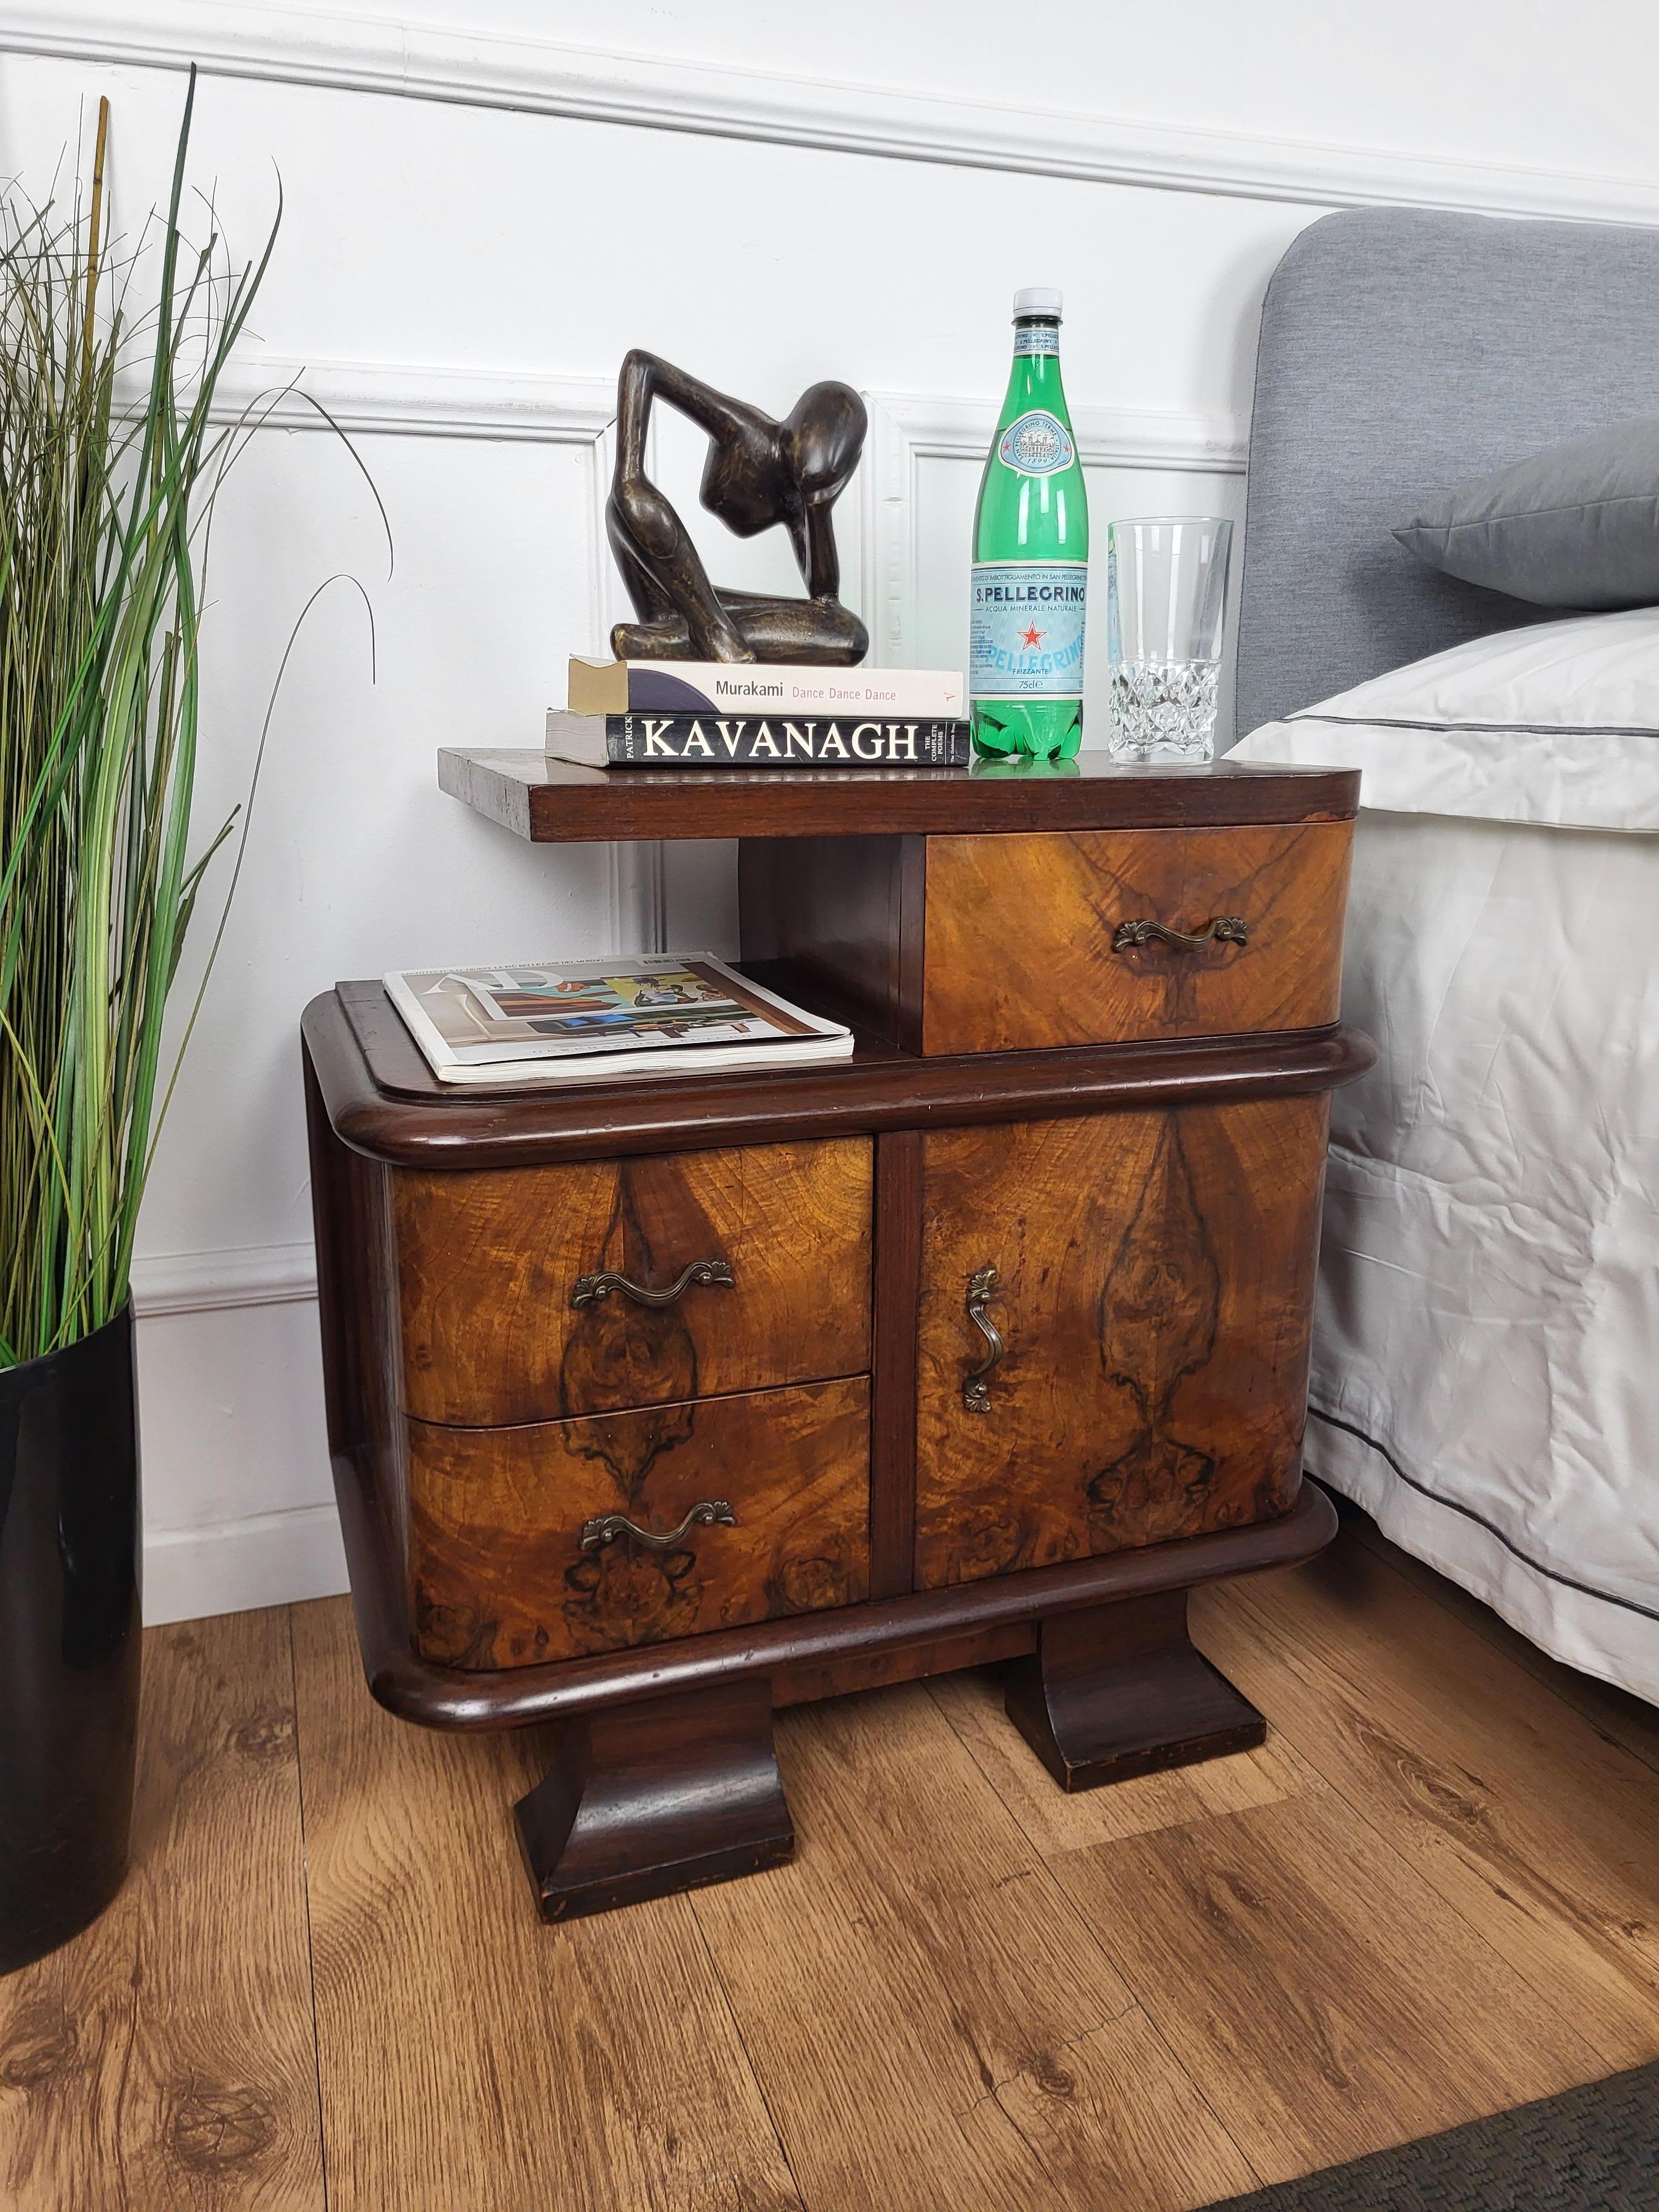 Very important, elegant and refined pair of Italian 1940s Art Deco bedside tables with great design shape and detail of every part and beautiful decors with the burl wood veneer in typical Art Deco style at its best. This night stands make a great